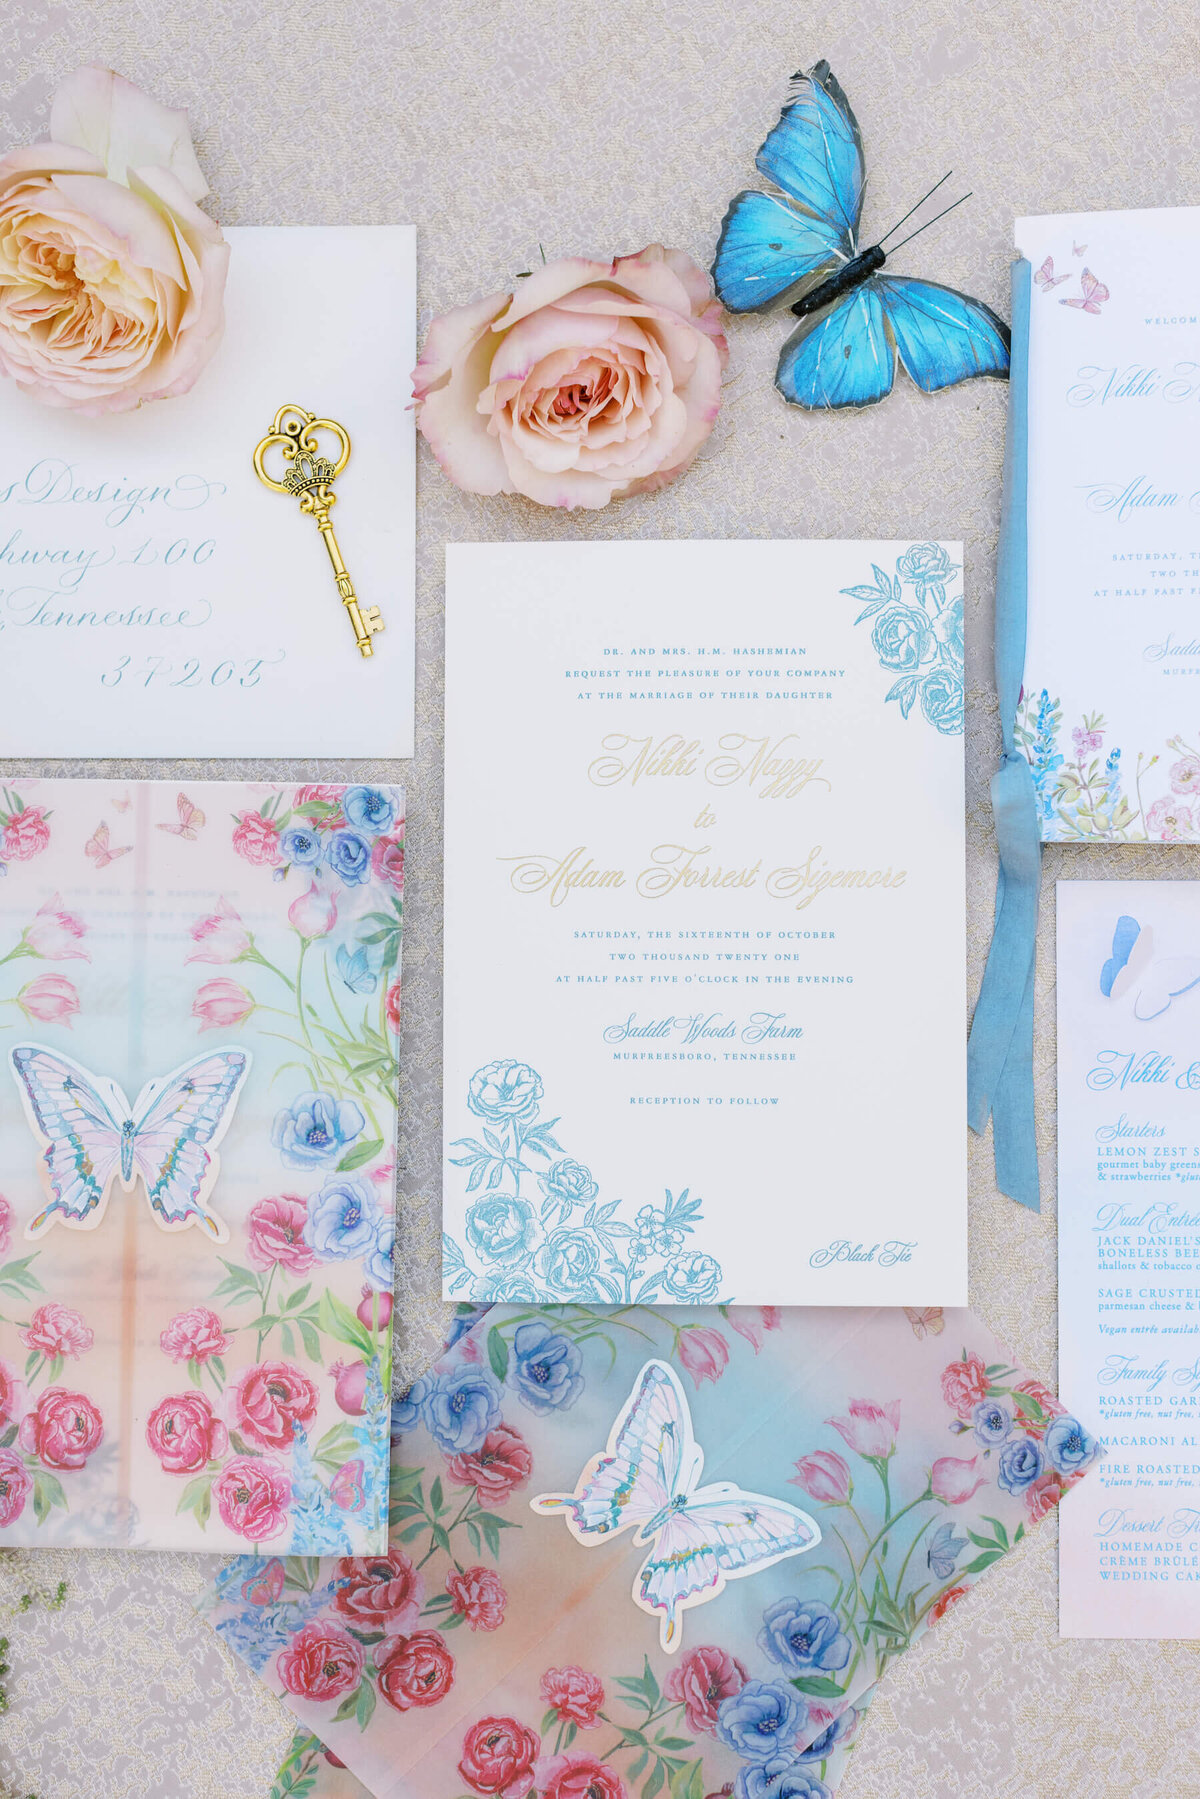 Tenn Hens butterfly and floral wedding invitations with blue ribbon and gold calligraphy.